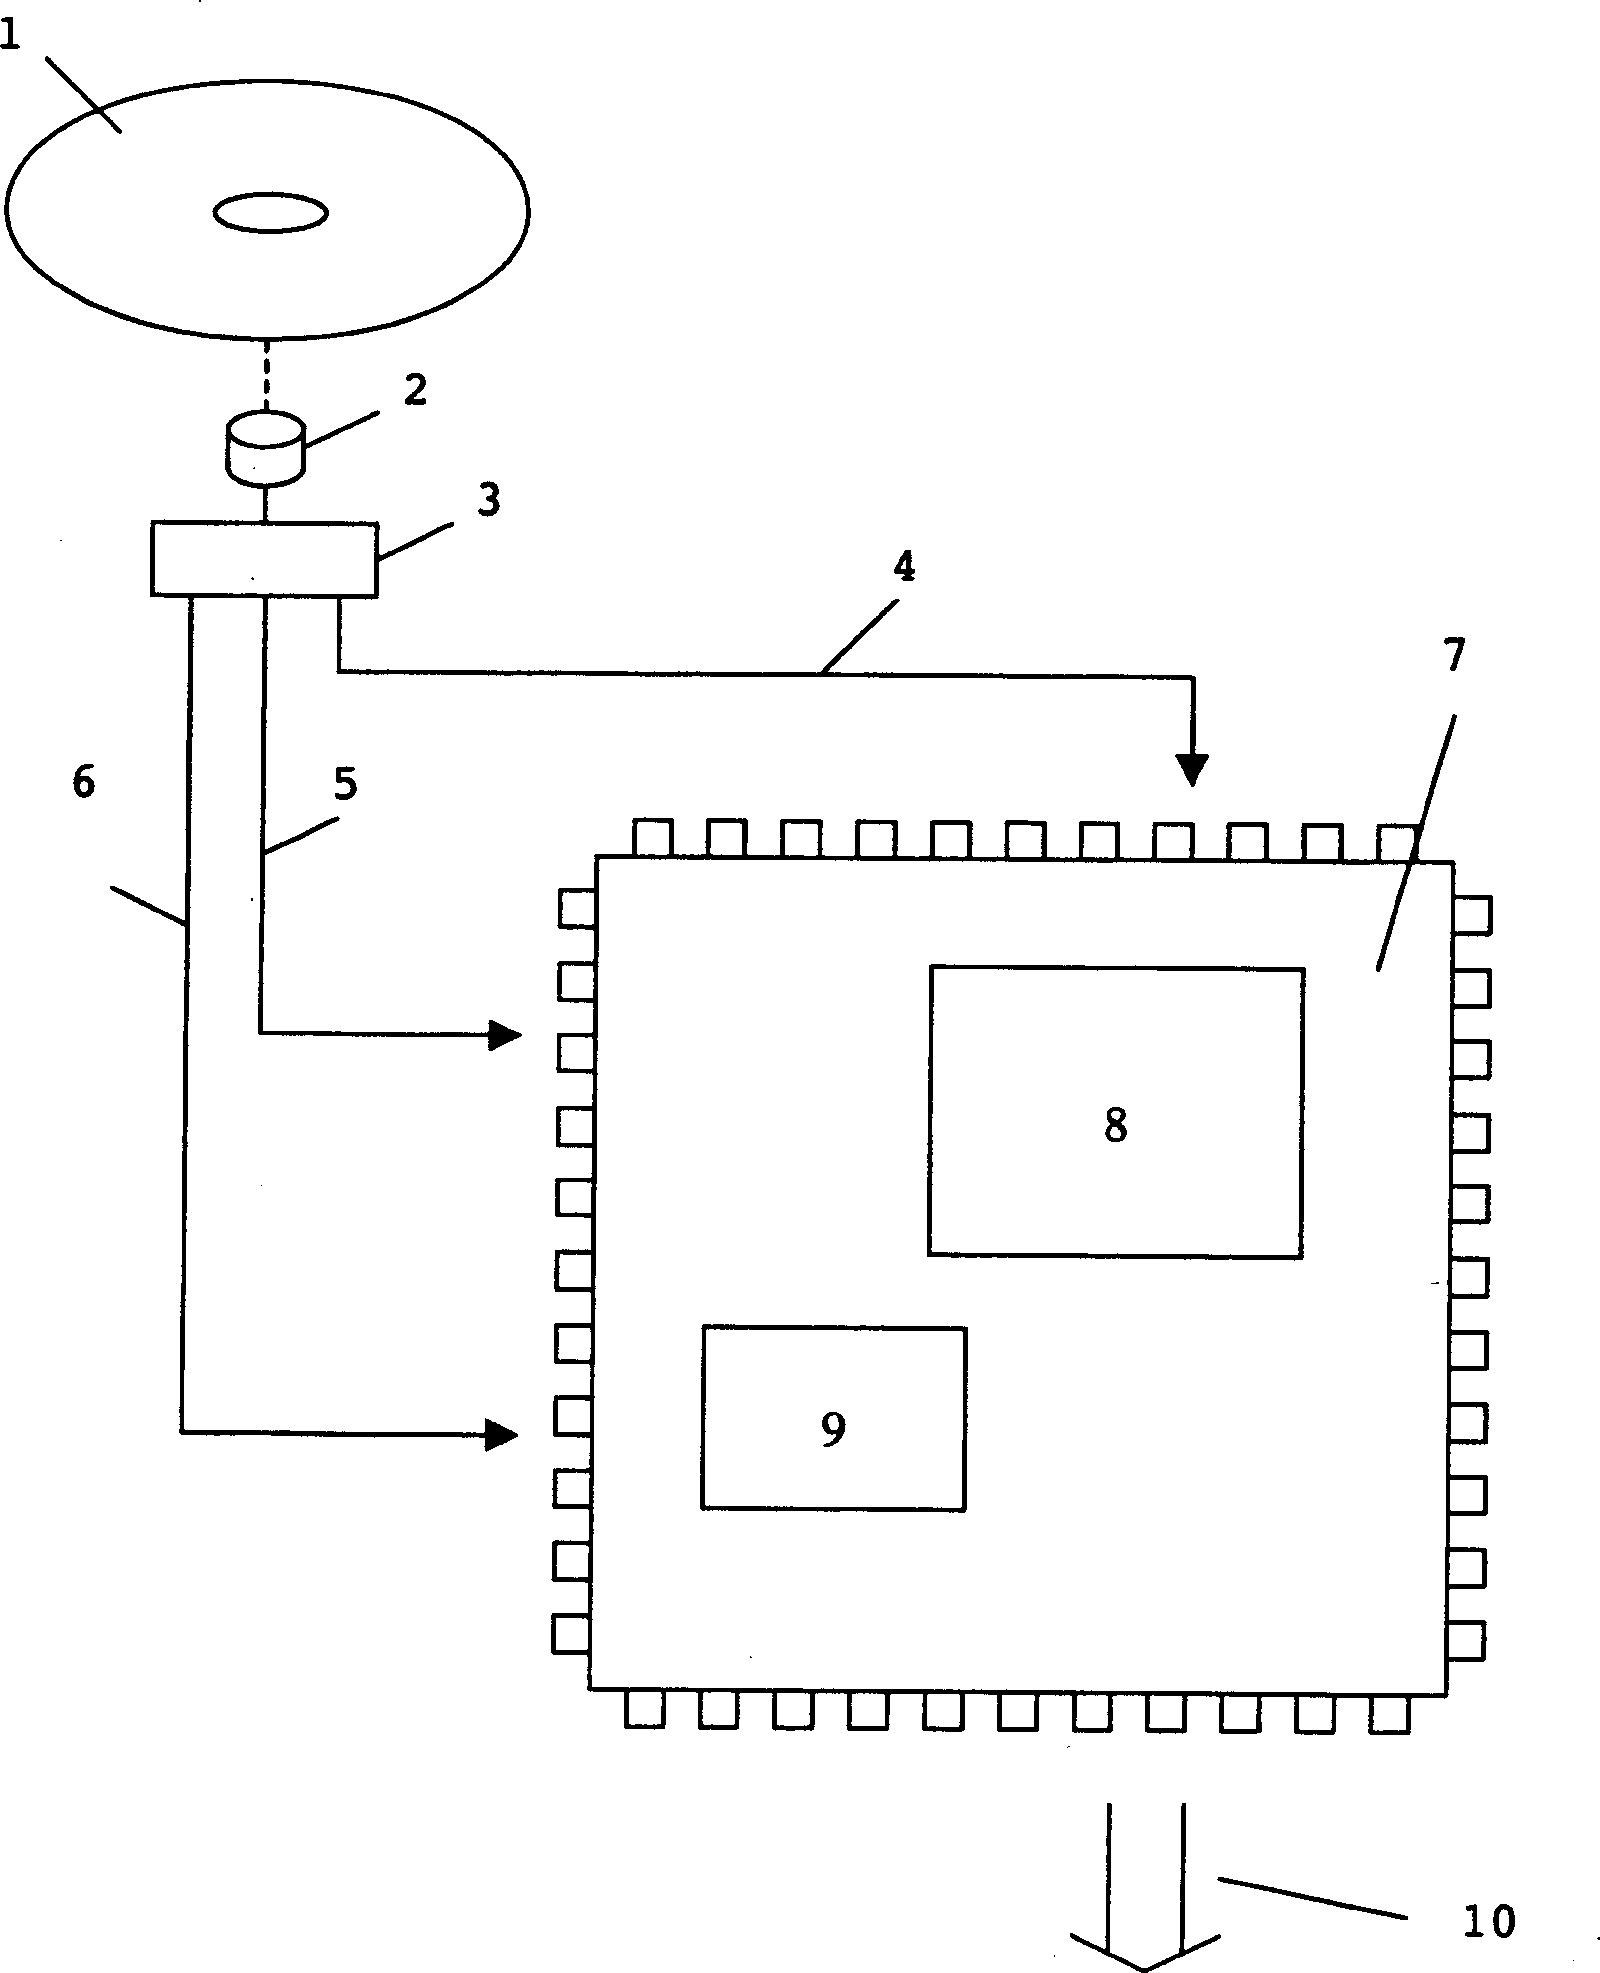 Method for decoding data received from a data source using hardware configuration data received from the same data source